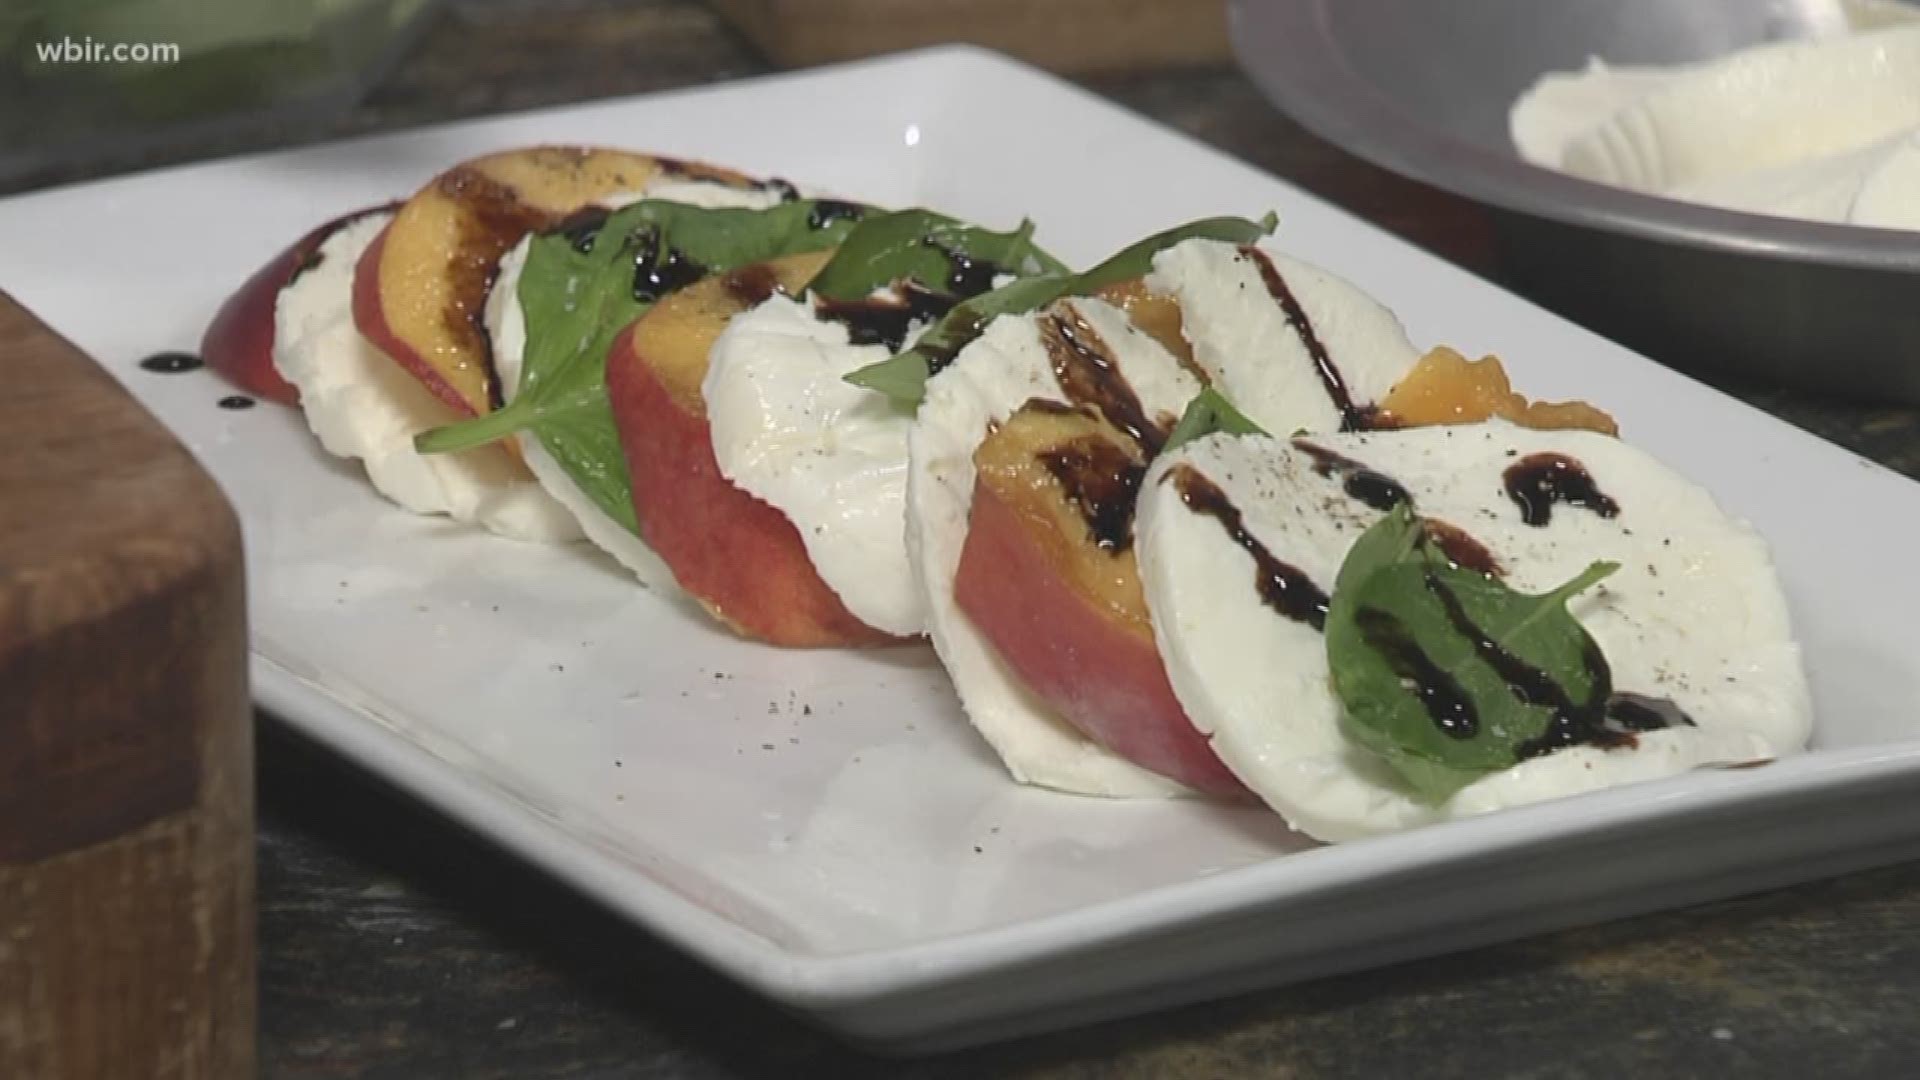 Today Kim Wilcox from It's All So Yummy Cafe is joining us in the kitchen! She is going to show us how to make a peach caprese salad.